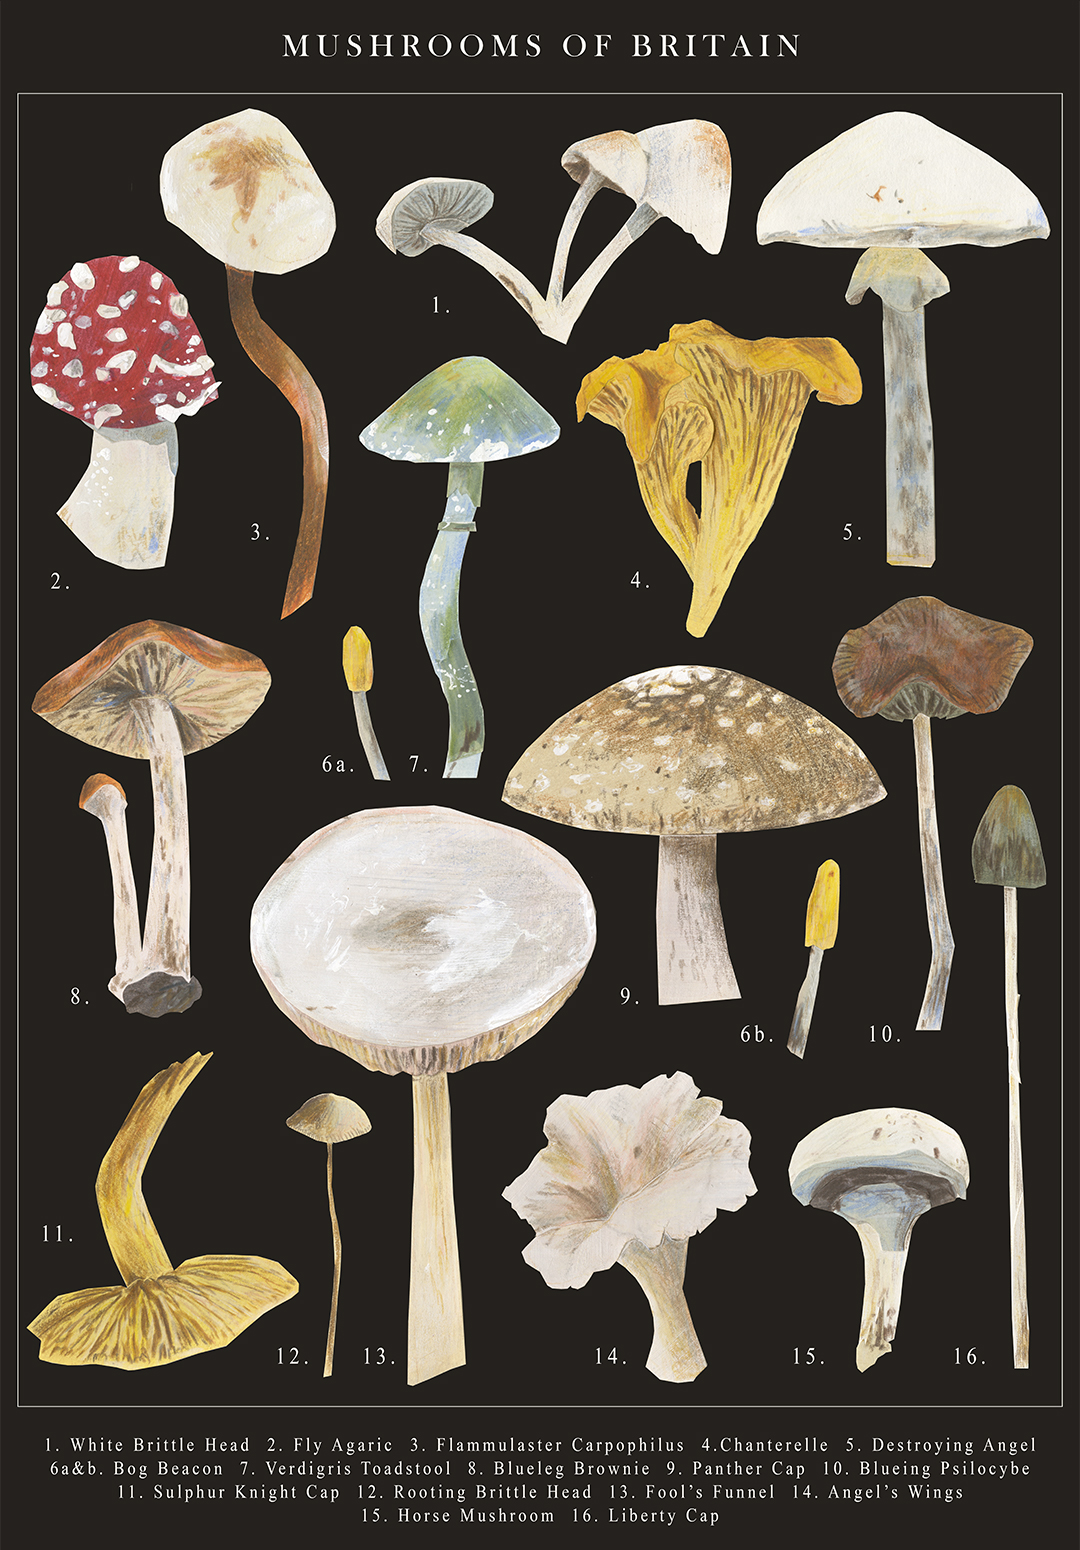 Mushrooms of Britain. A poster of different mushrooms found in Britain, the mushrooms were made from painted paper and coloured pencils.